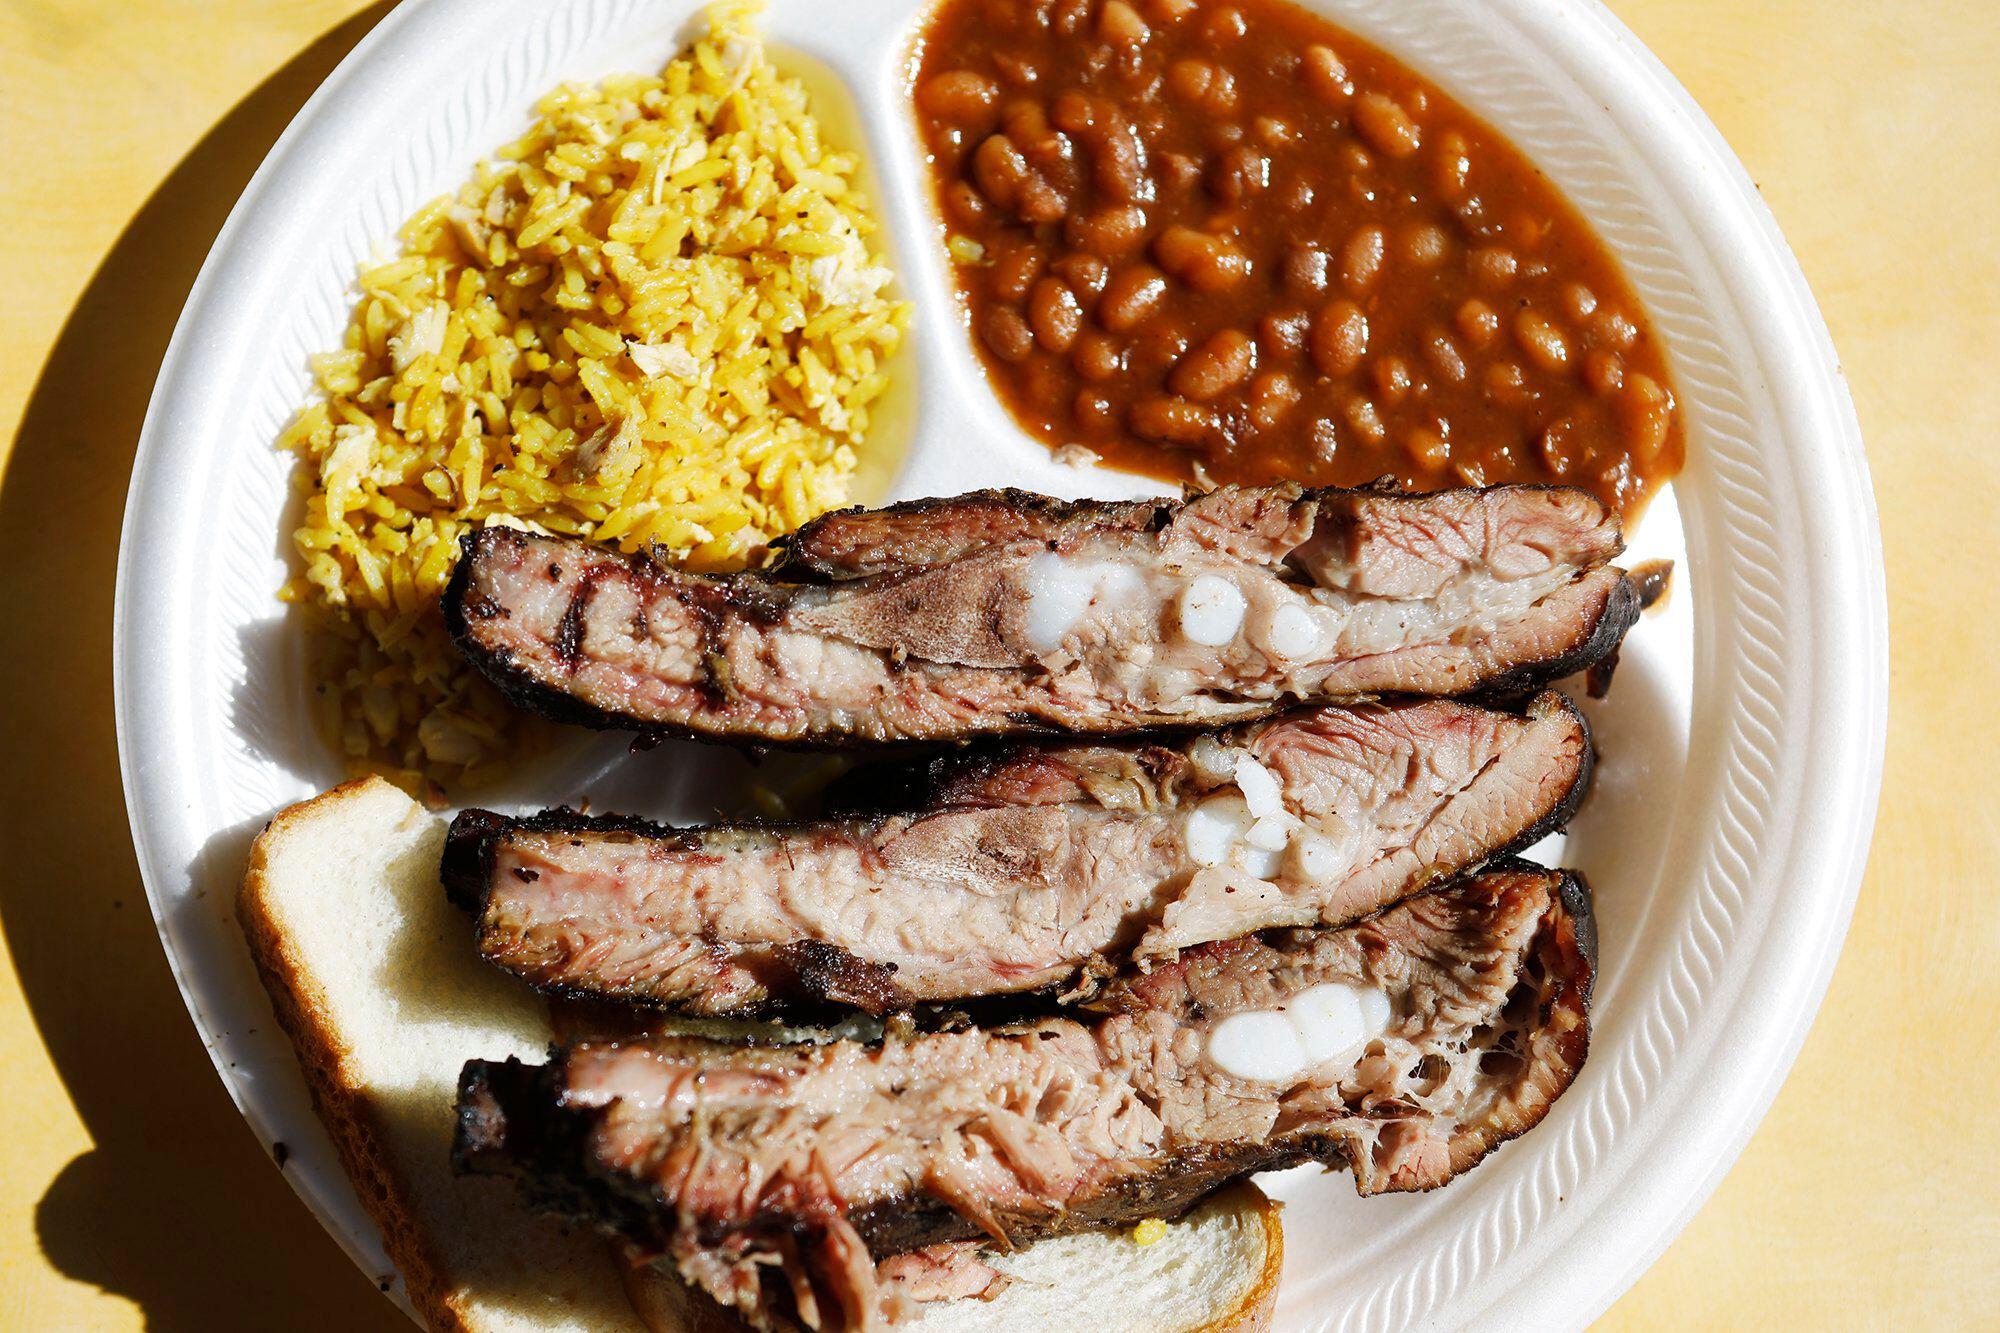 Savour tasty dishes from Al’s Finger Licking Good Bar-B-Que